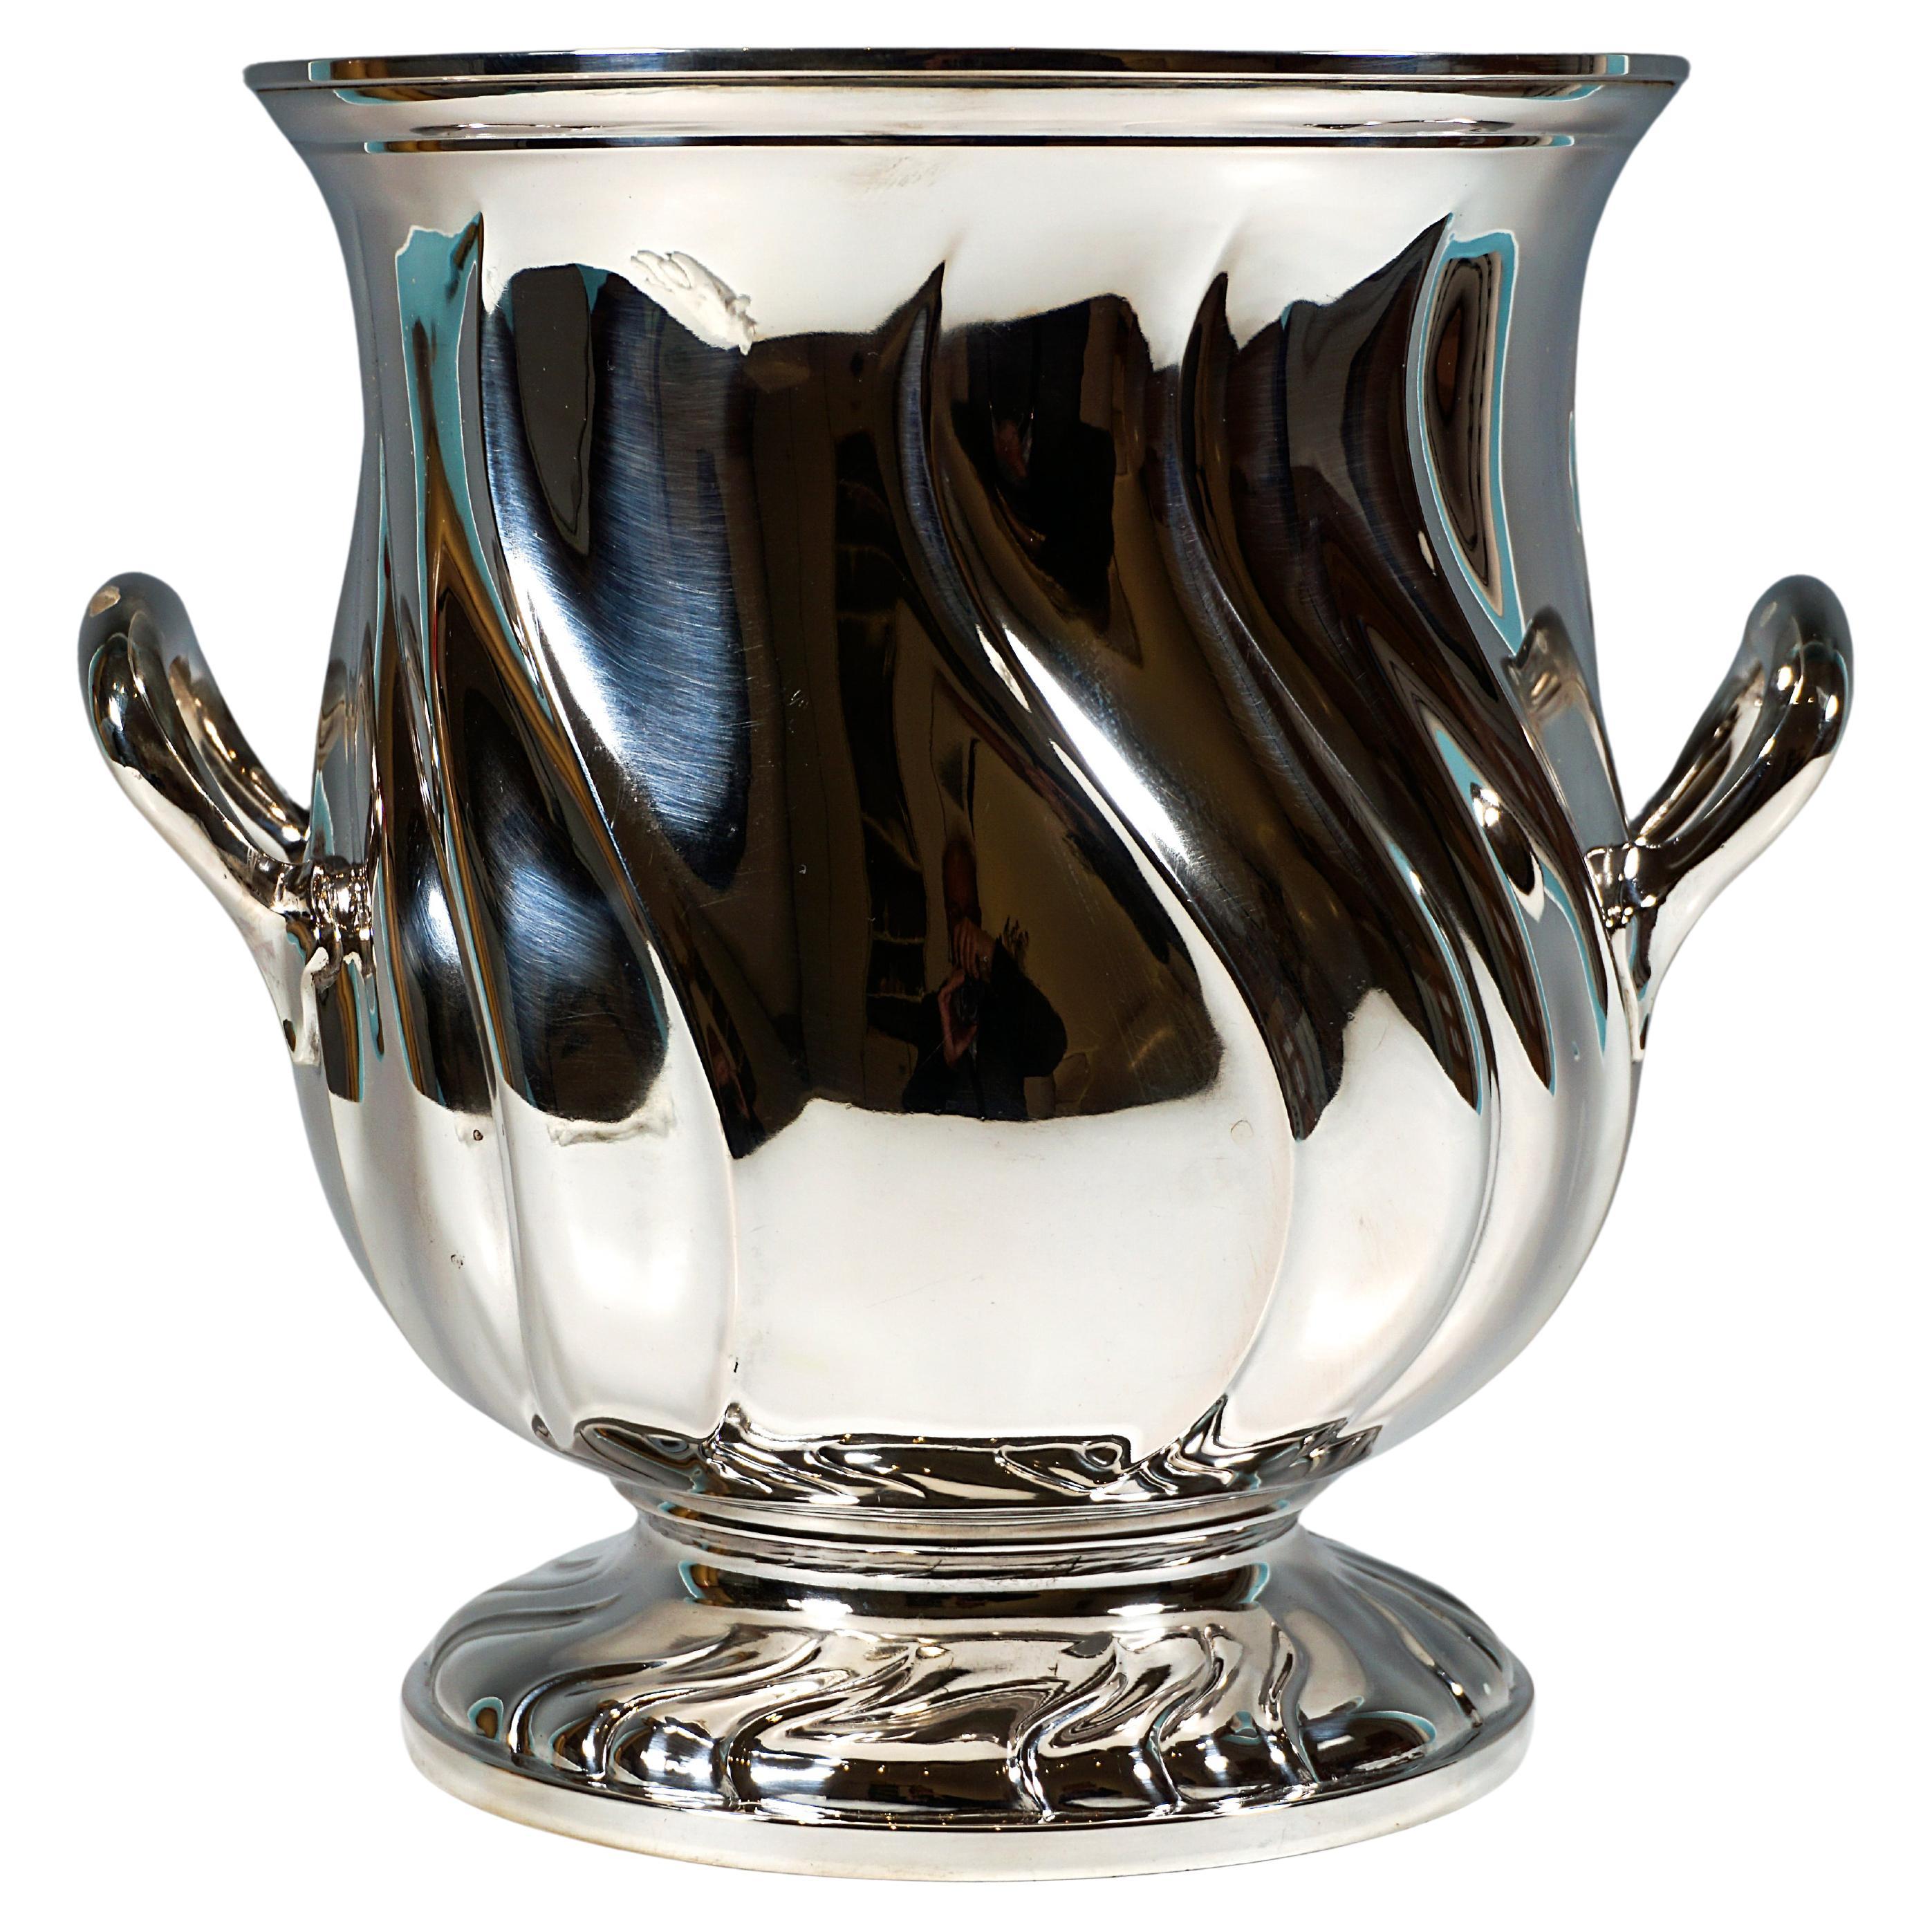 Silver Champagne Cooler In Tulip Shape, Wilkens & Sons Germany, 1919